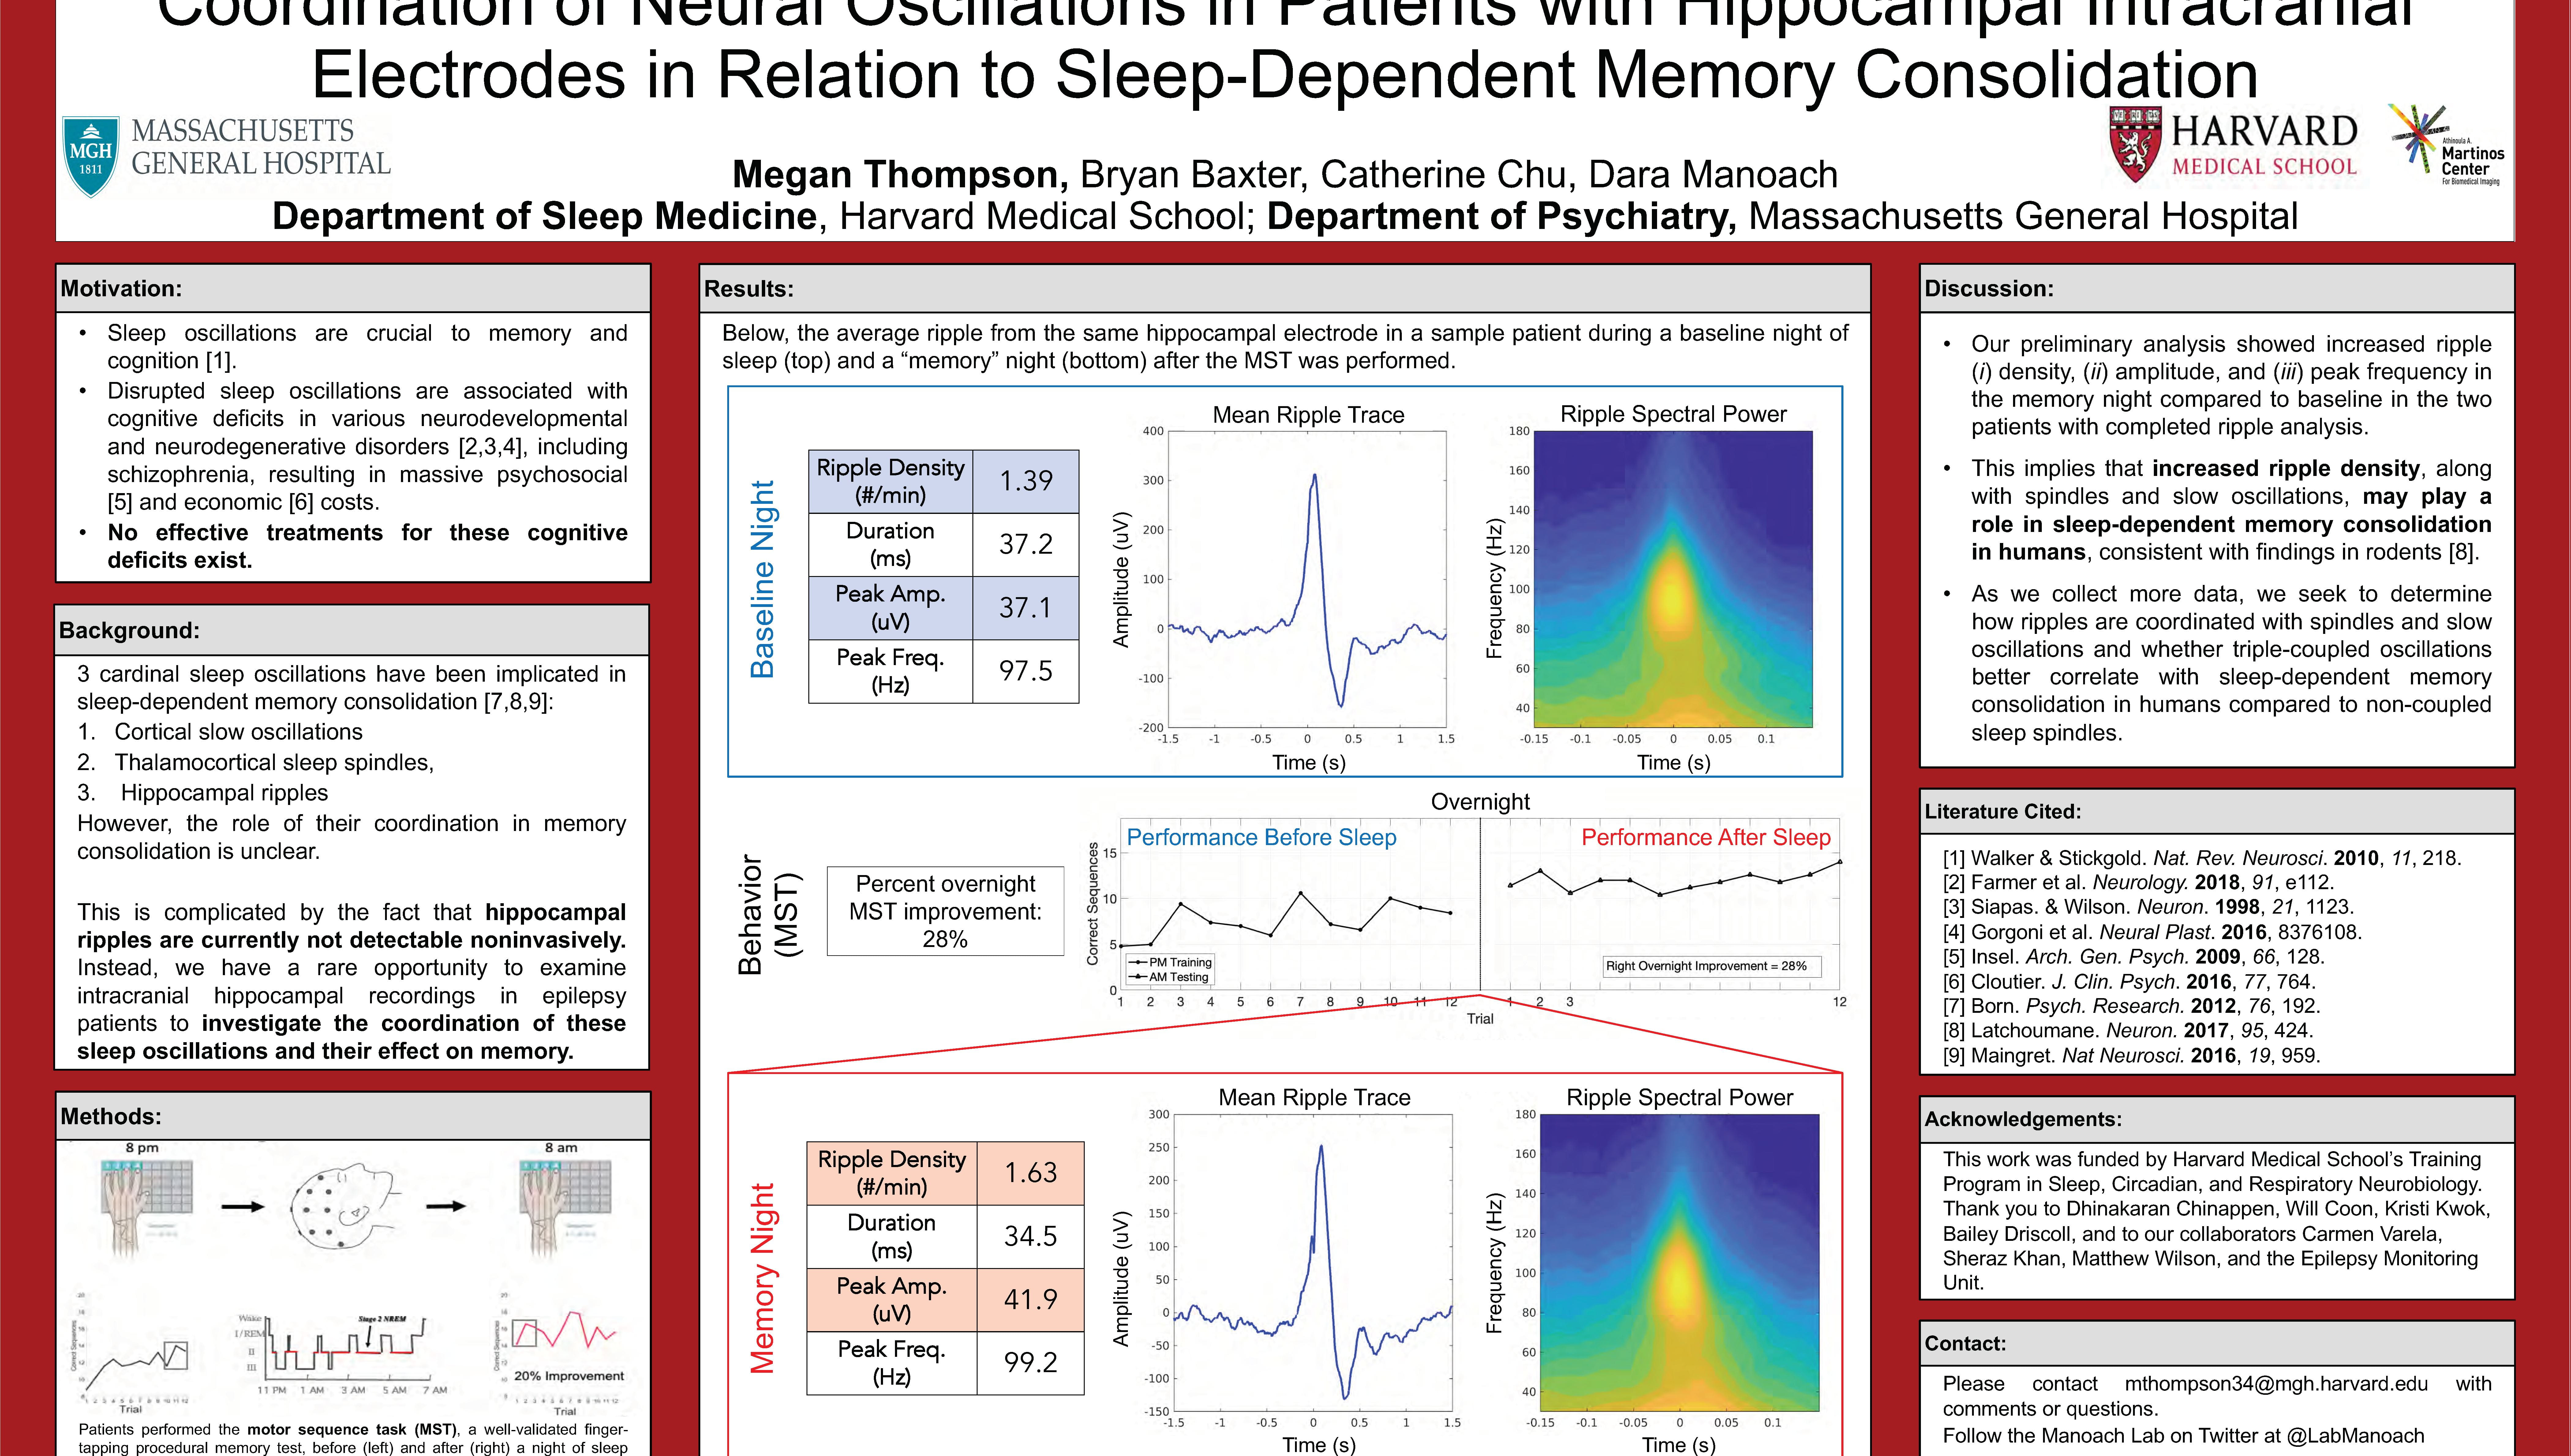 Coordination of Neural Oscillations in Patients with Hippocampal Intracranial Electrodes in Relation to Sleep-Dependent Memory Consolidation